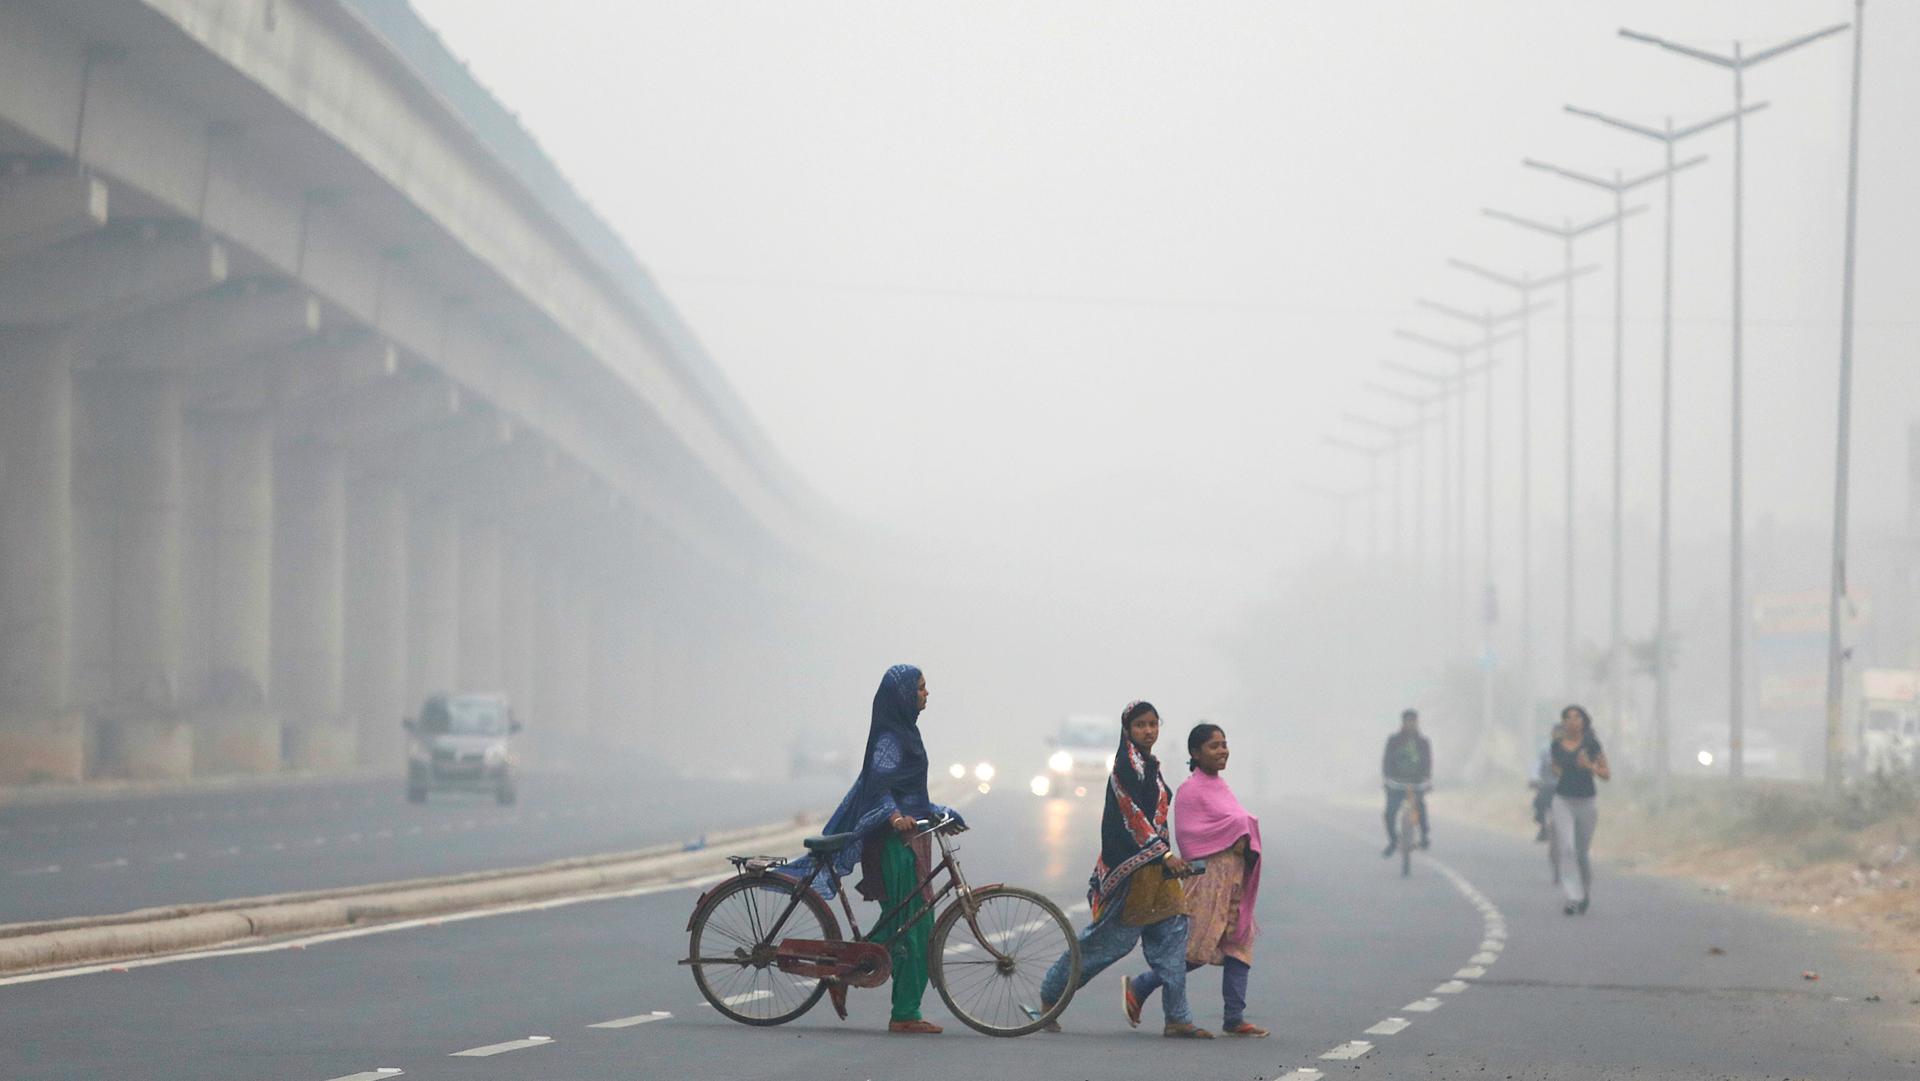 People cross the road in Delhi, India, during the height of the most recent air pollution crisis, Nov. 7, 2017.